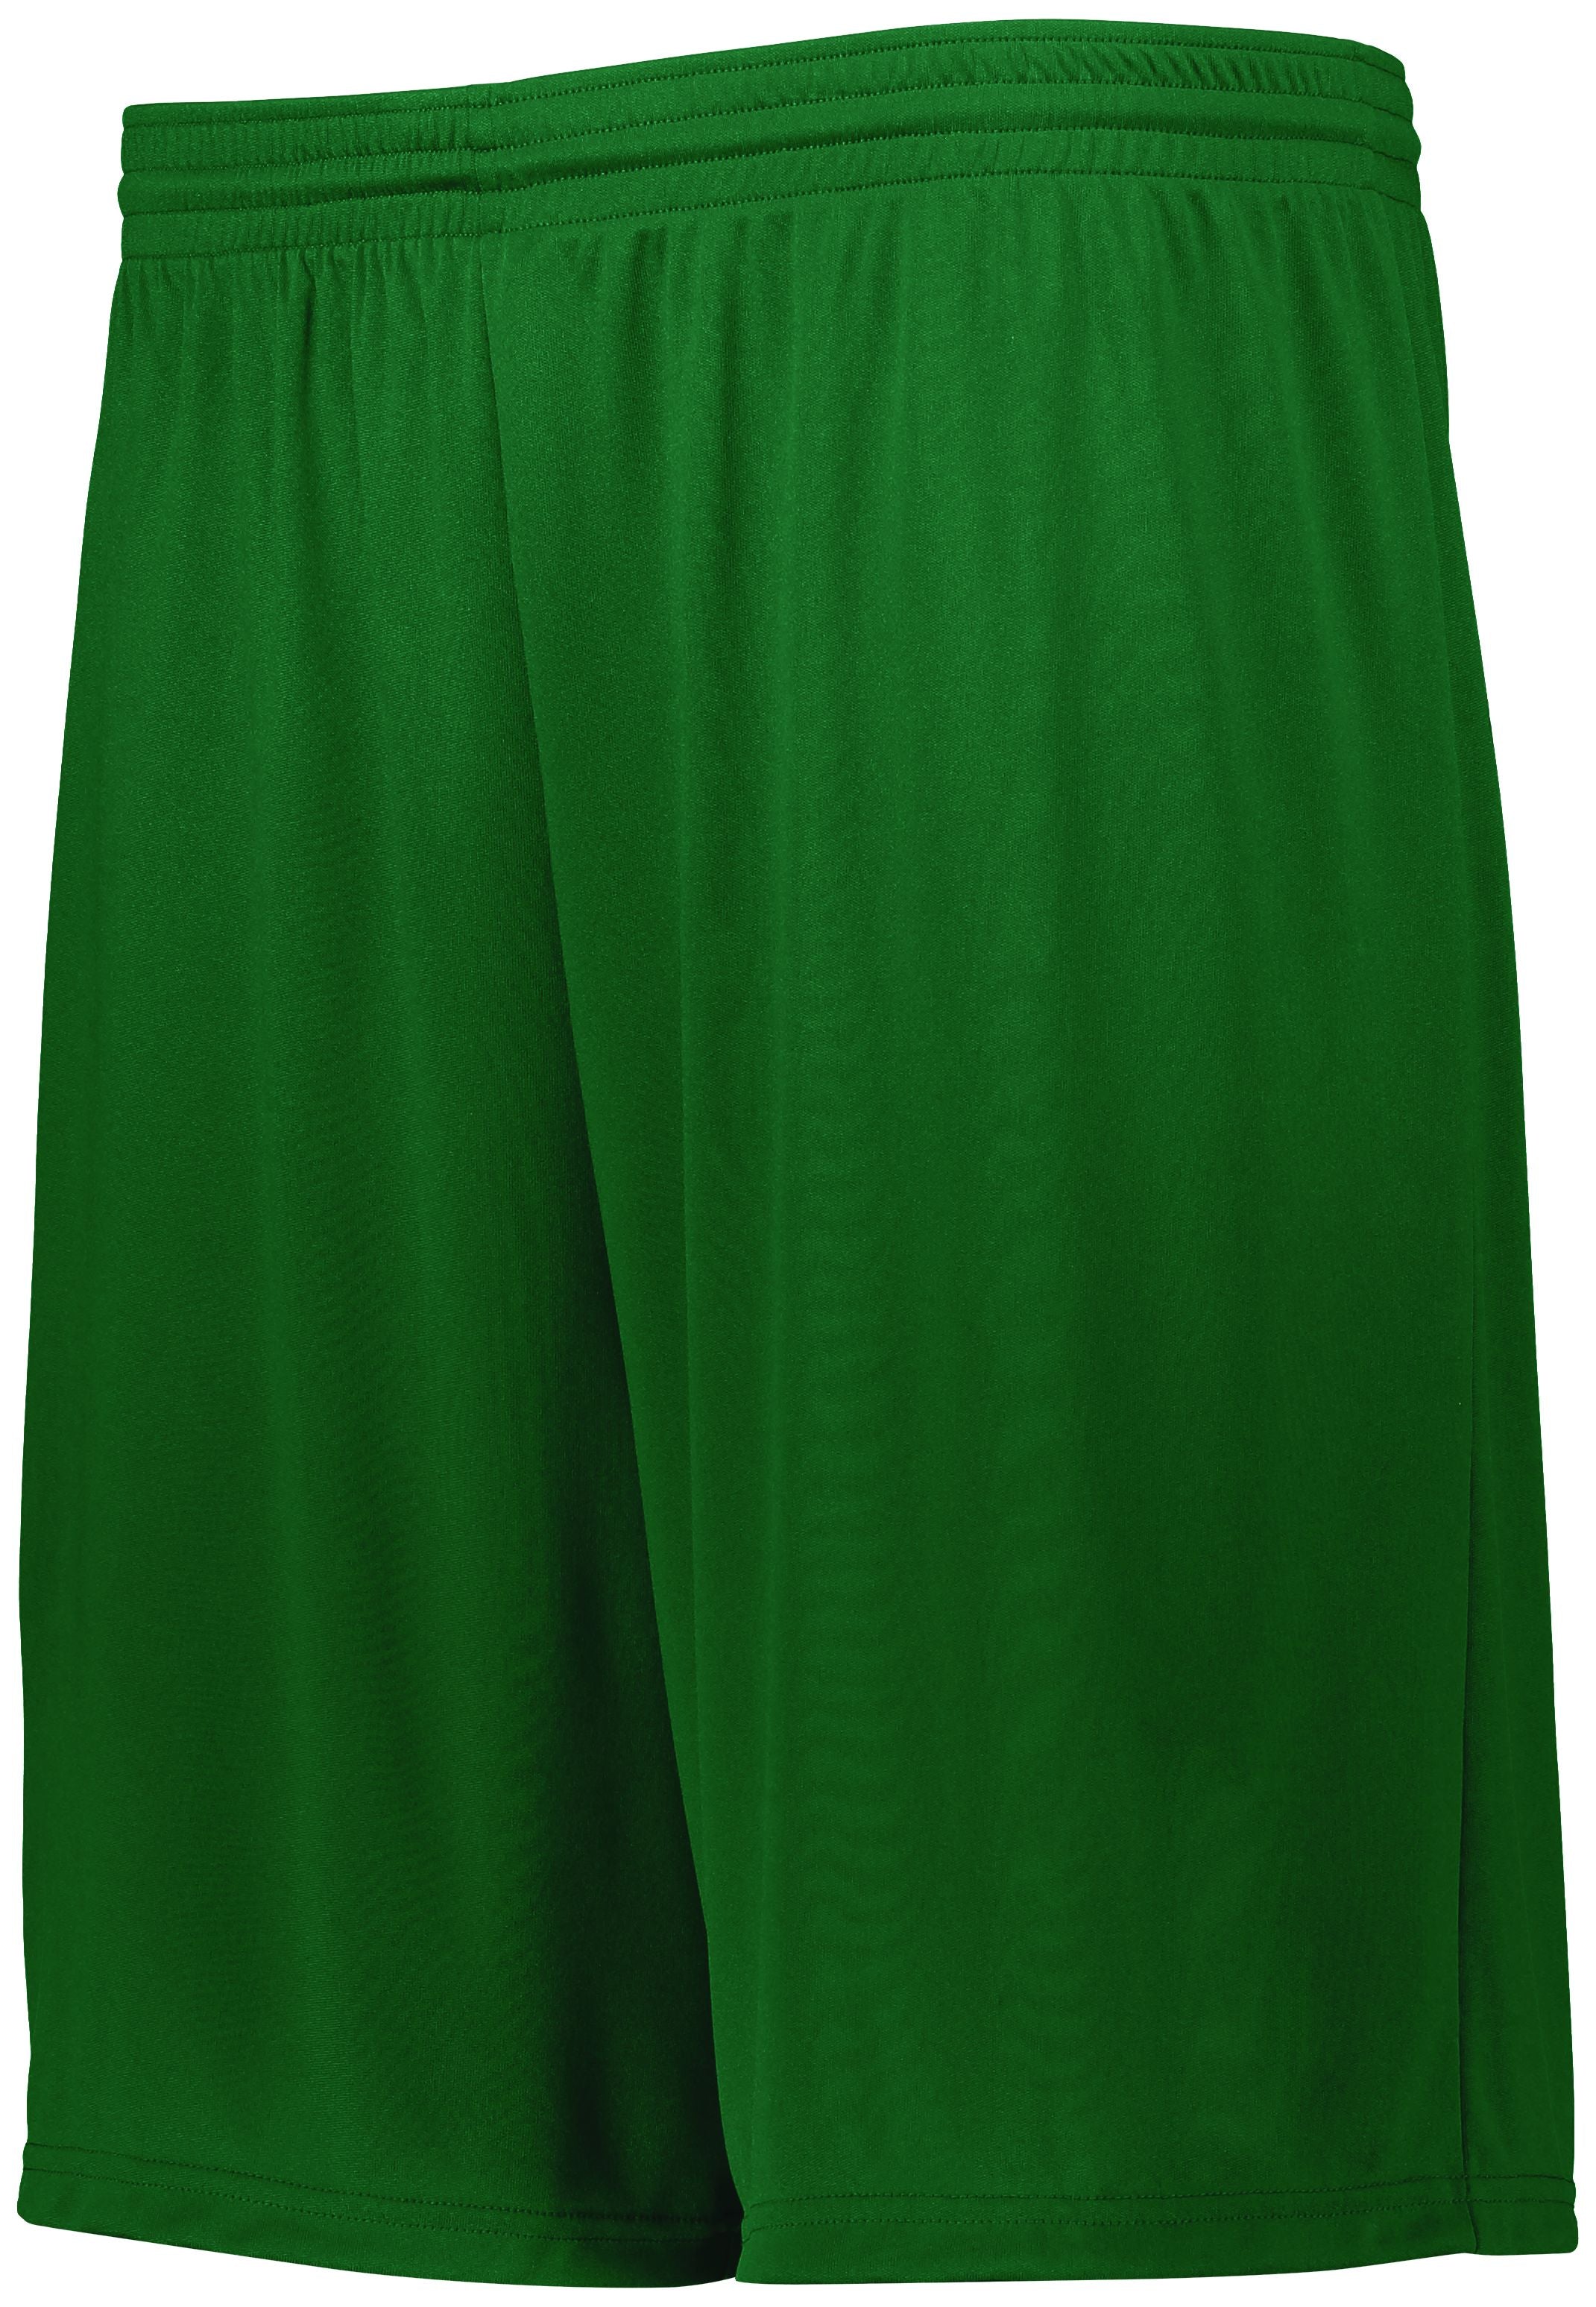 Augusta Sportswear Attain Wicking Shorts in Dark Green  -Part of the Adult, Adult-Shorts, Augusta-Products product lines at KanaleyCreations.com